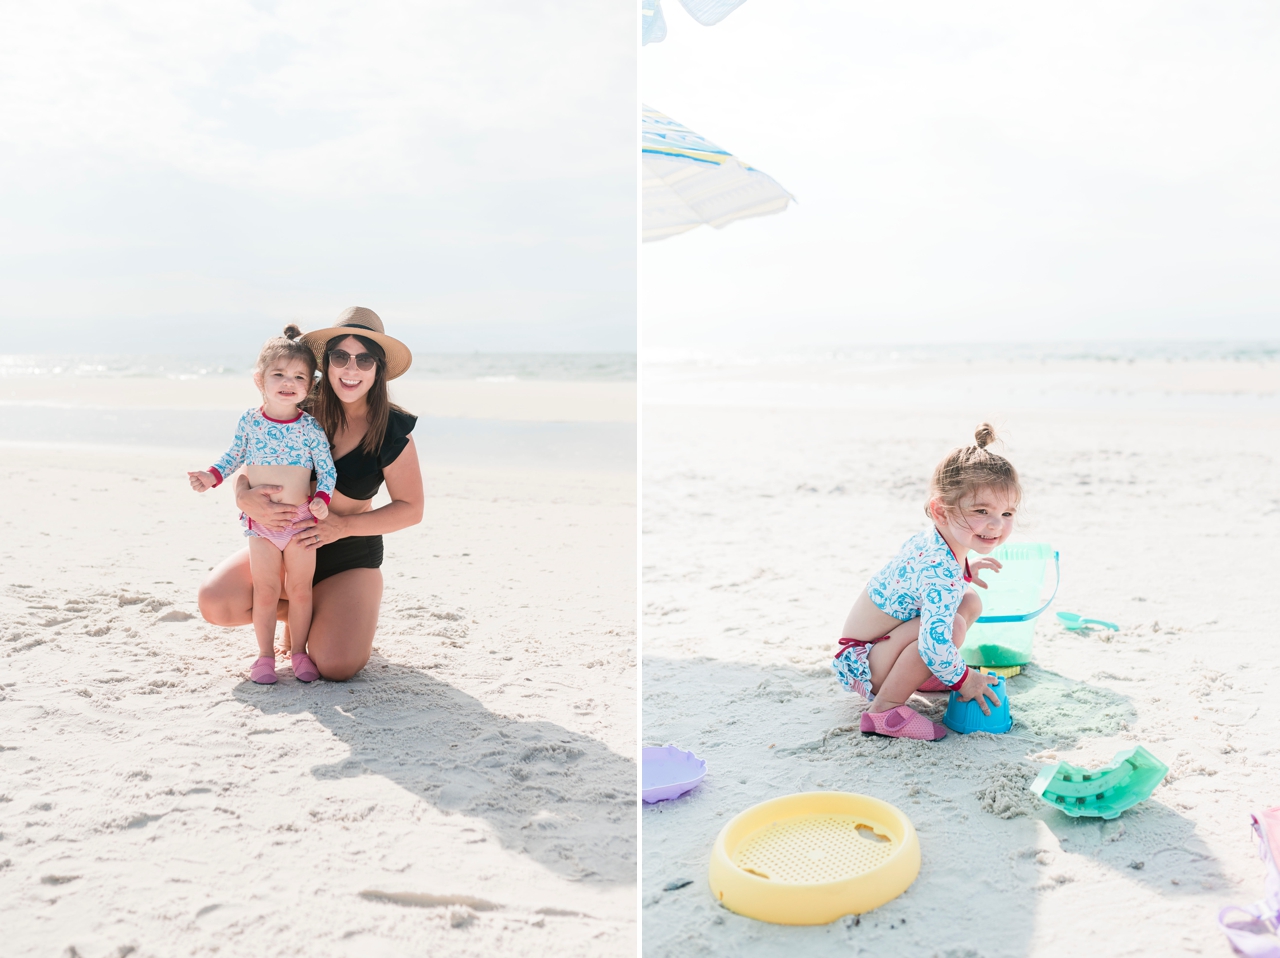 Brittney Naylor and daughter playing on the white sands of Gulf Shores Alabama, 3 best beach destinations